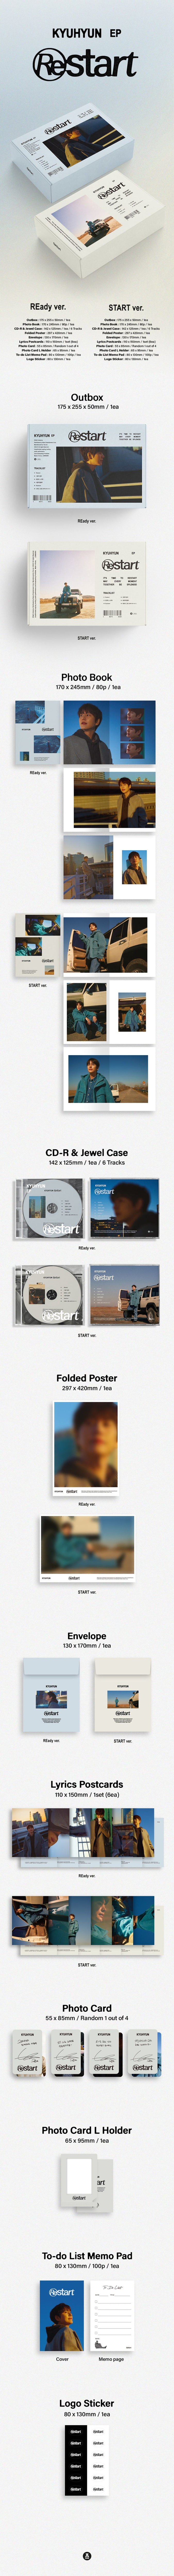 KYUHYUN EP 'Restart' with 2 Version REady ver. and START ver.